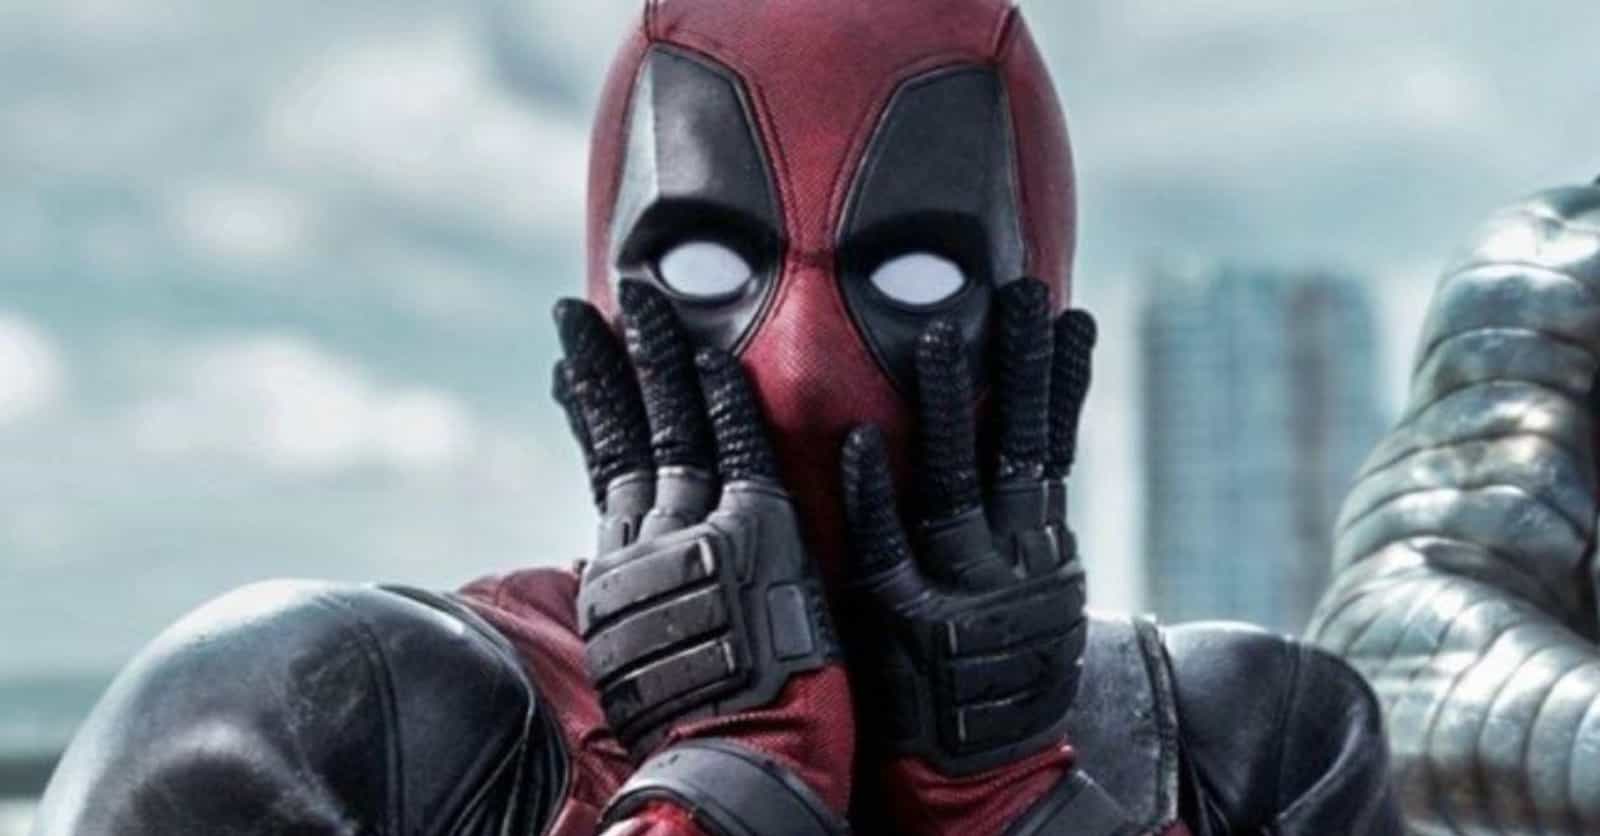 What The Haters Are Saying About Deadpool 2